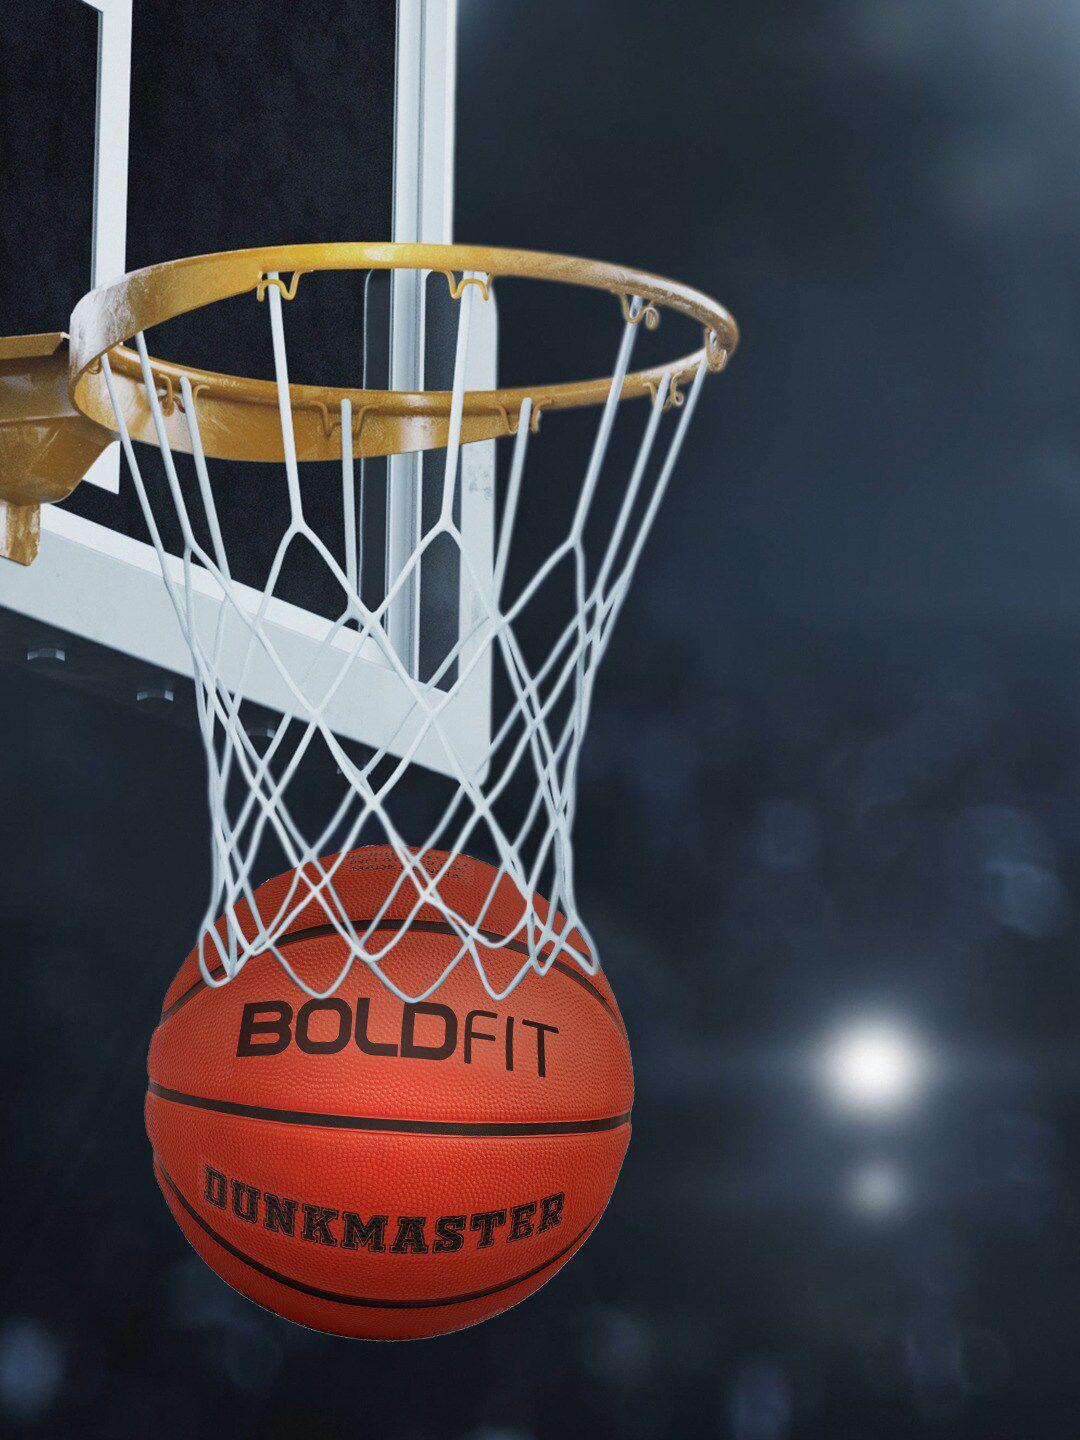 boldfit printed water resistant 7 professional basketball with free air needle